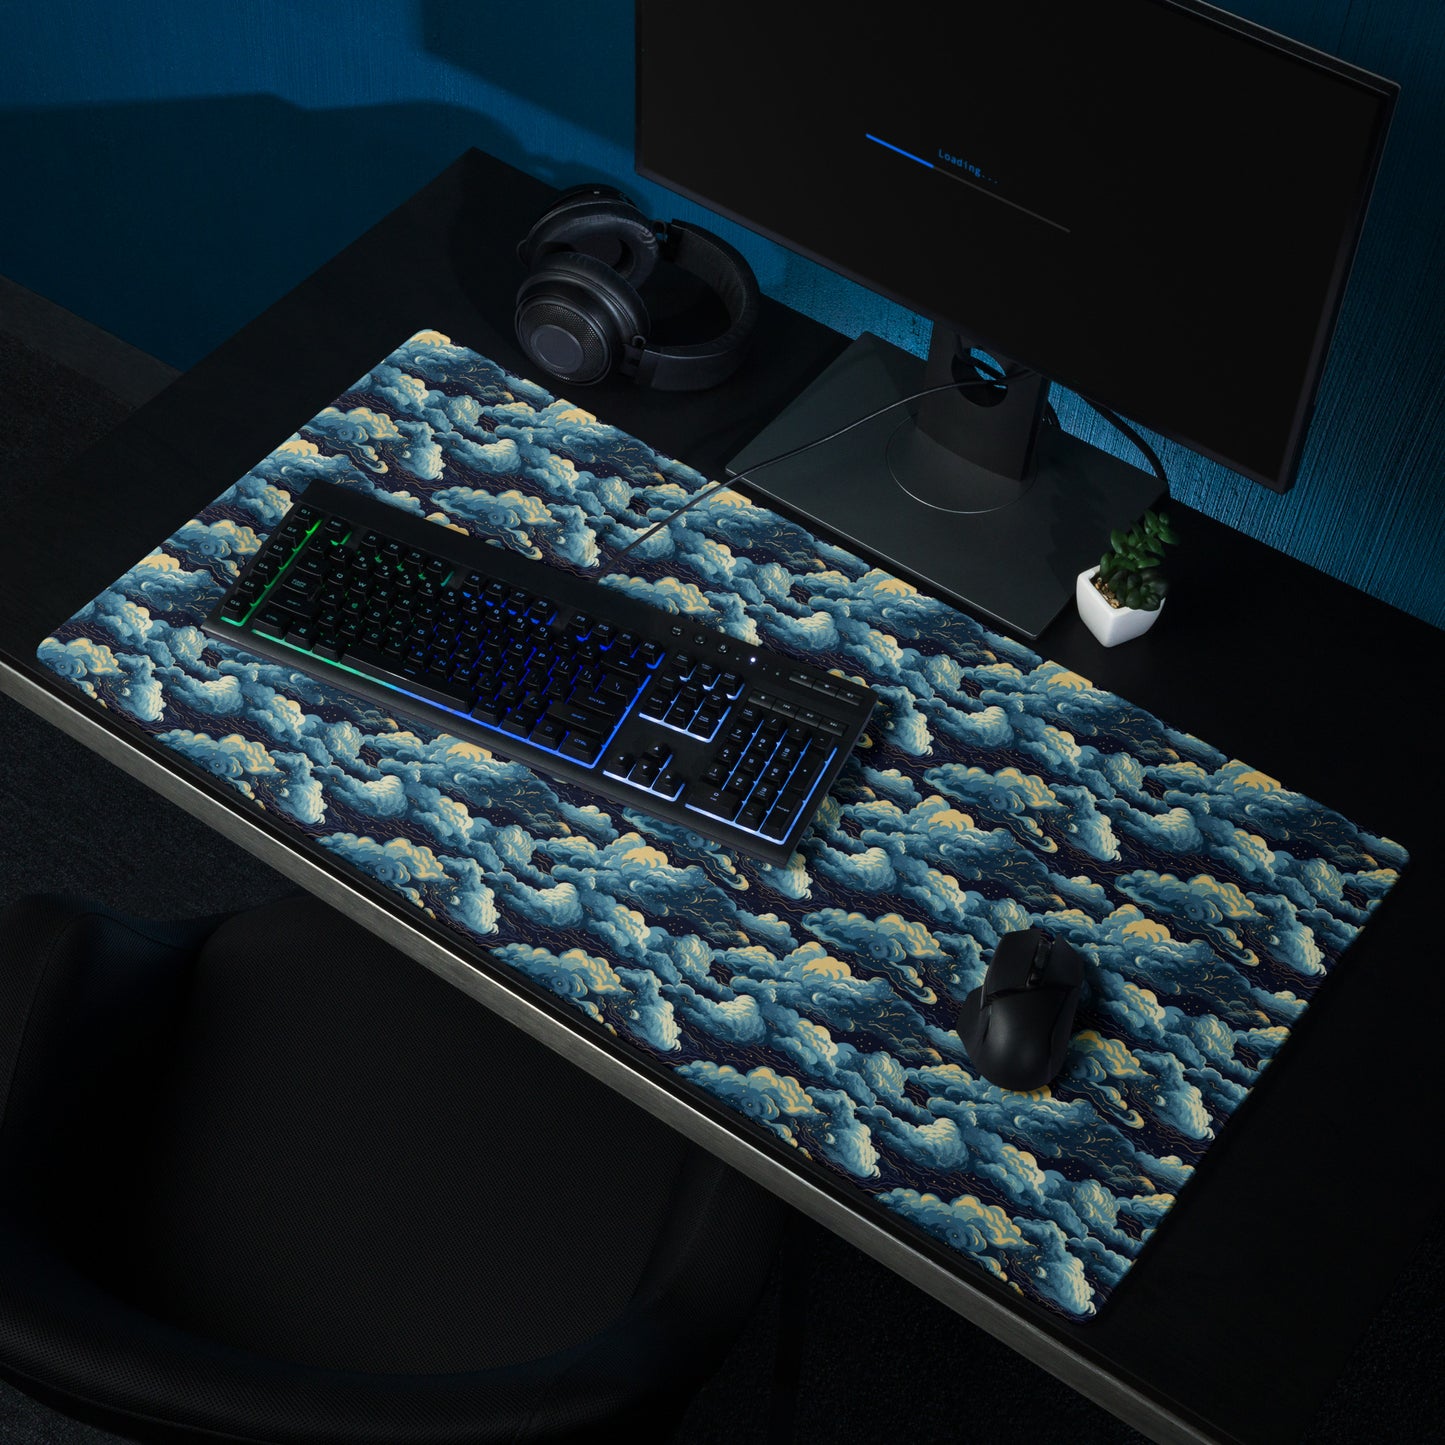 A 36" x 18" desk pad with a cloudy night sky pattern sitting on a desk.